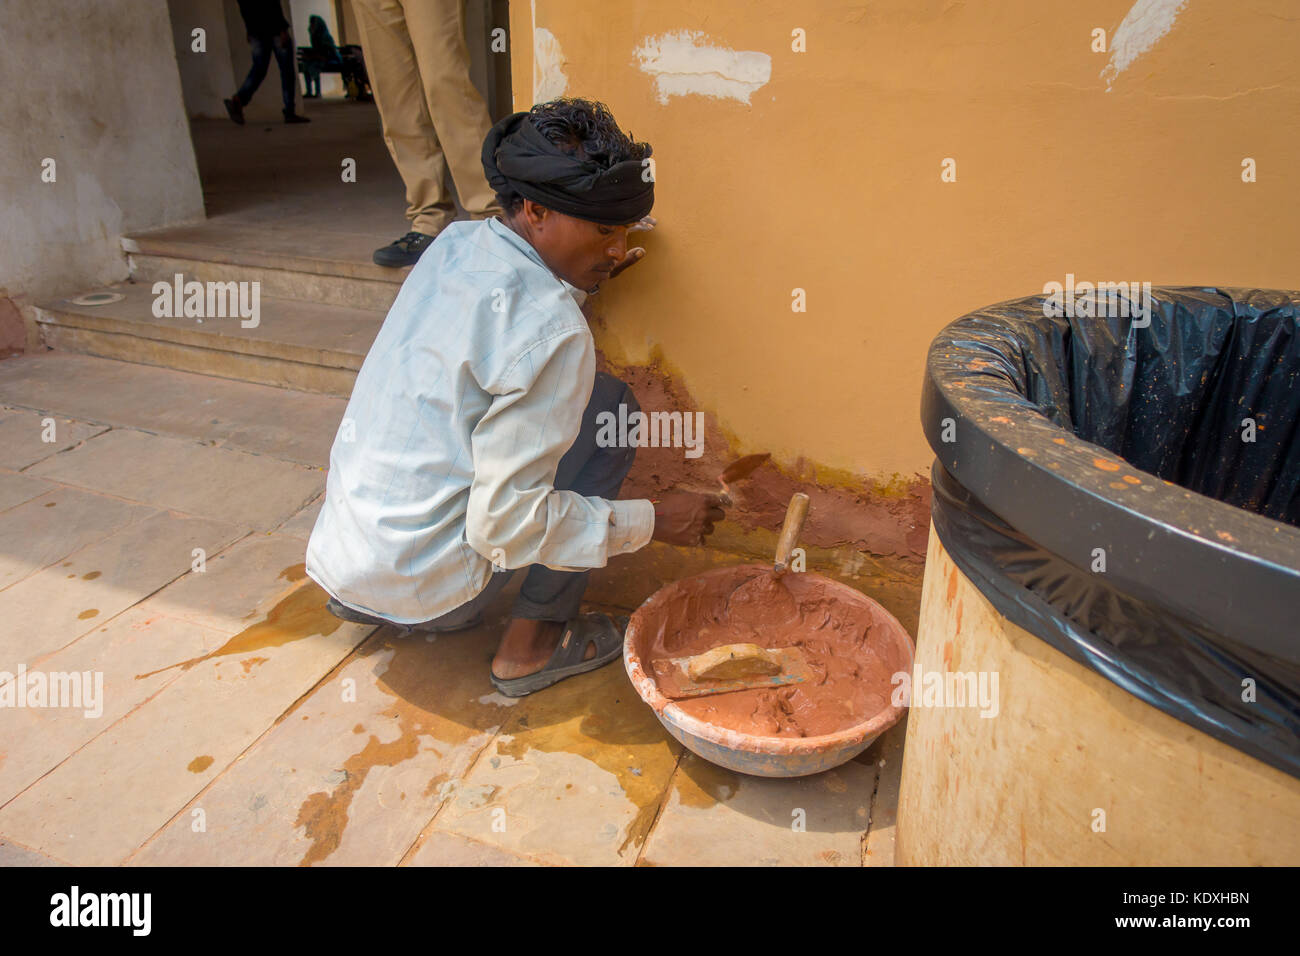 Amber, India - September 19, 2017: Unidentified Indian man wearing a white t-shirt and grey pants, working with clay fixing wall problems in the city of Amber, India Stock Photo